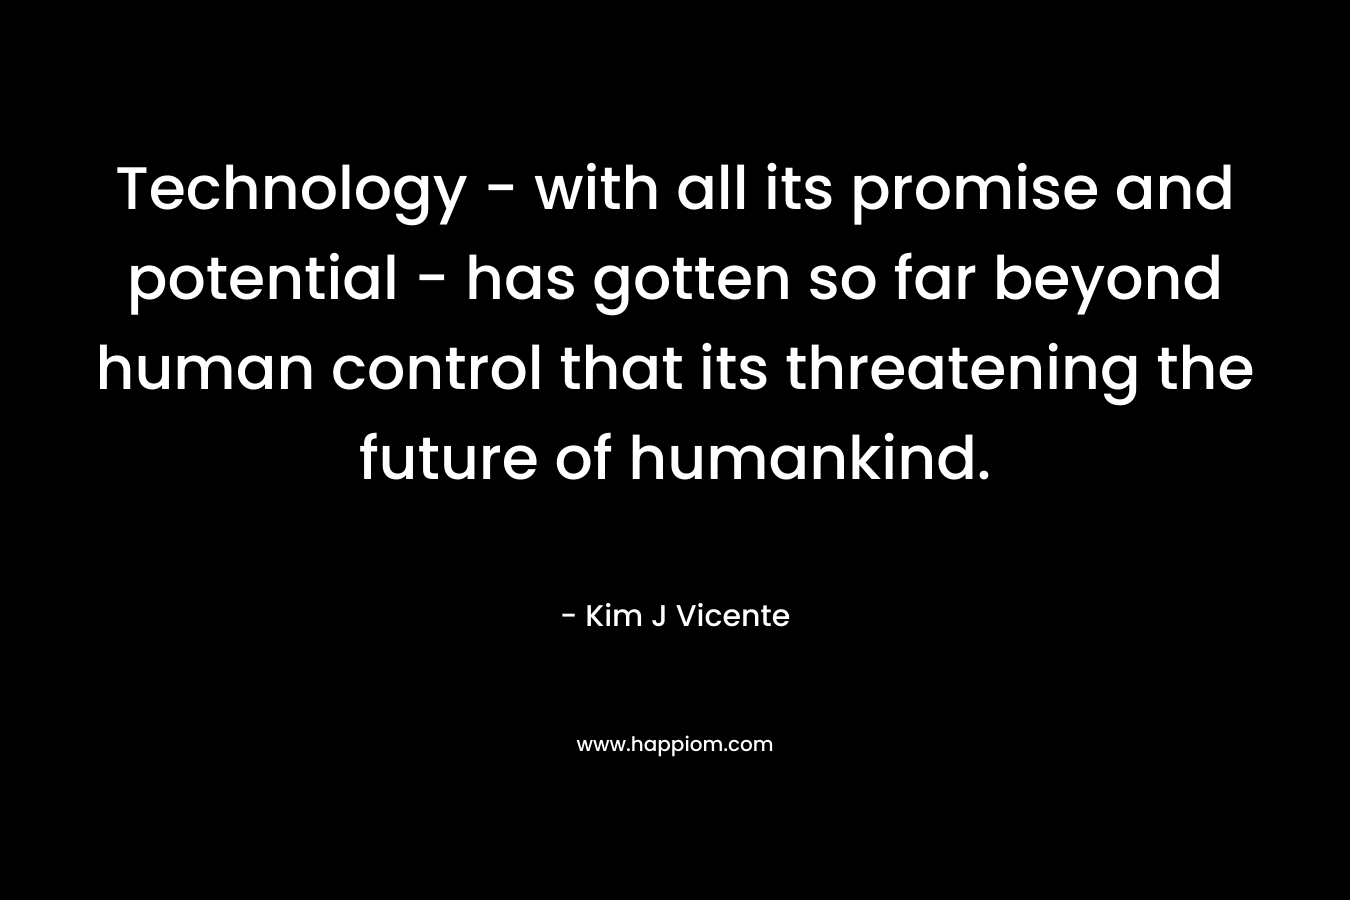 Technology – with all its promise and potential – has gotten so far beyond human control that its threatening the future of humankind. – Kim J Vicente